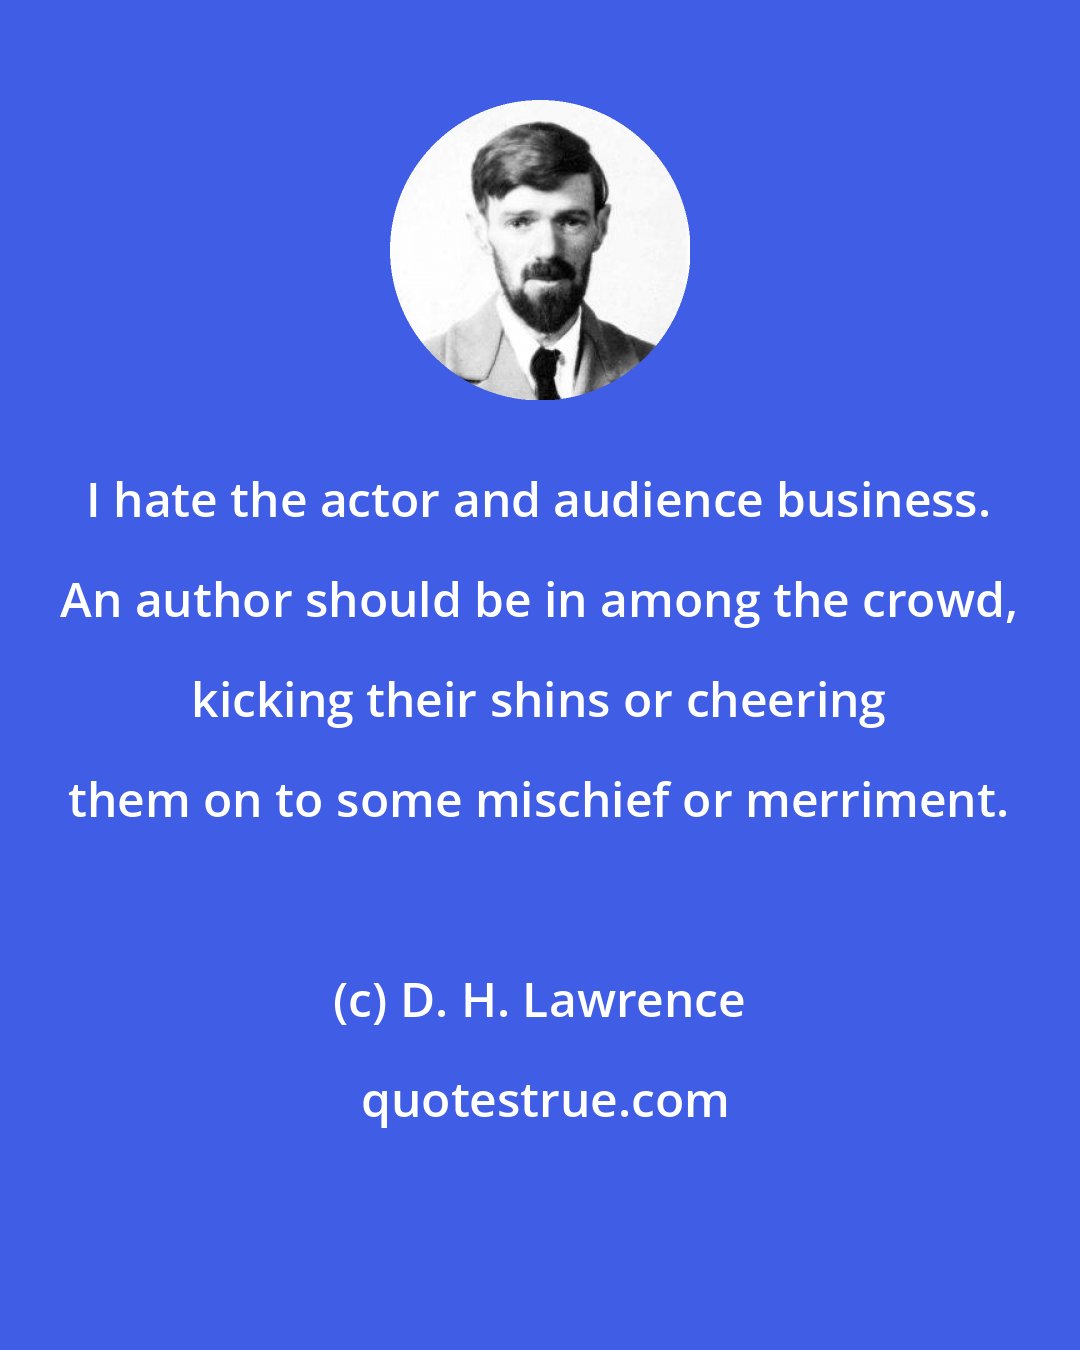 D. H. Lawrence: I hate the actor and audience business. An author should be in among the crowd, kicking their shins or cheering them on to some mischief or merriment.